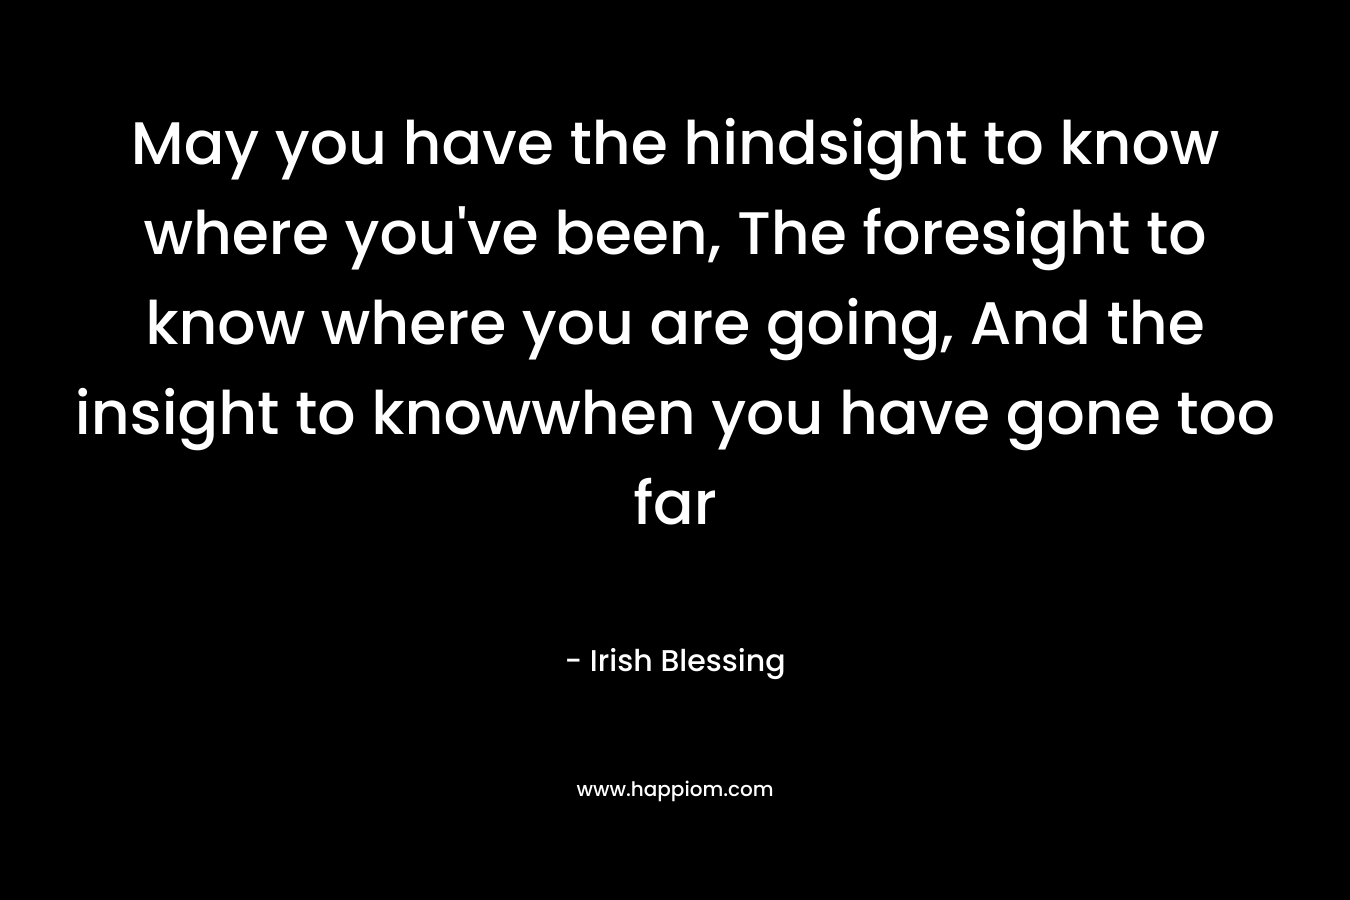 May you have the hindsight to know where you’ve been, The foresight to know where you are going, And the insight to knowwhen you have gone too far – Irish Blessing